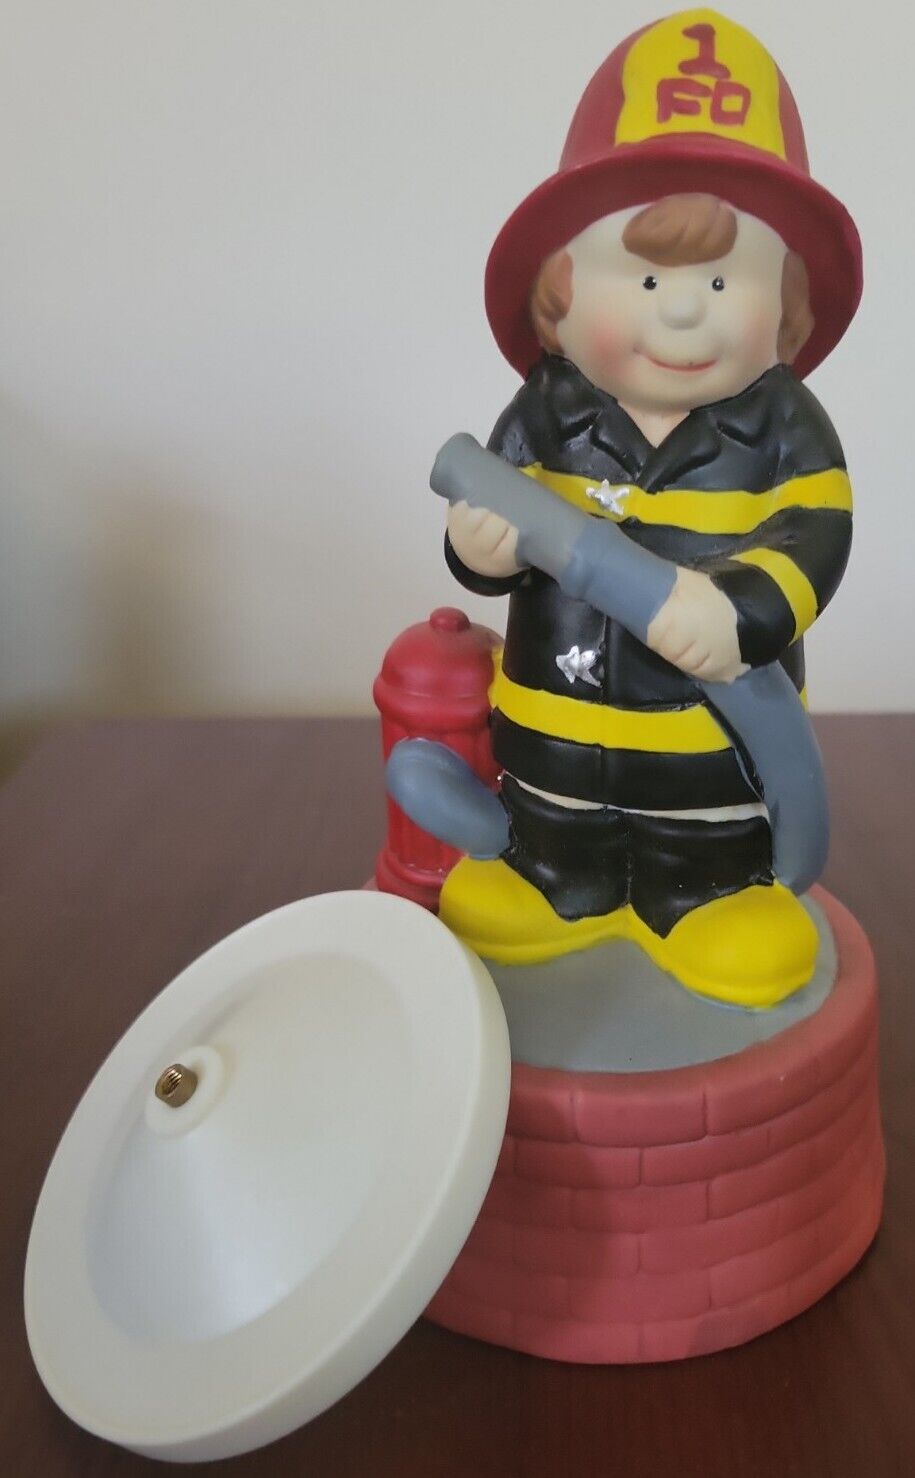 Vintage Ceramic Firefighter Music Box Figurine JSNY Great Condition Tested